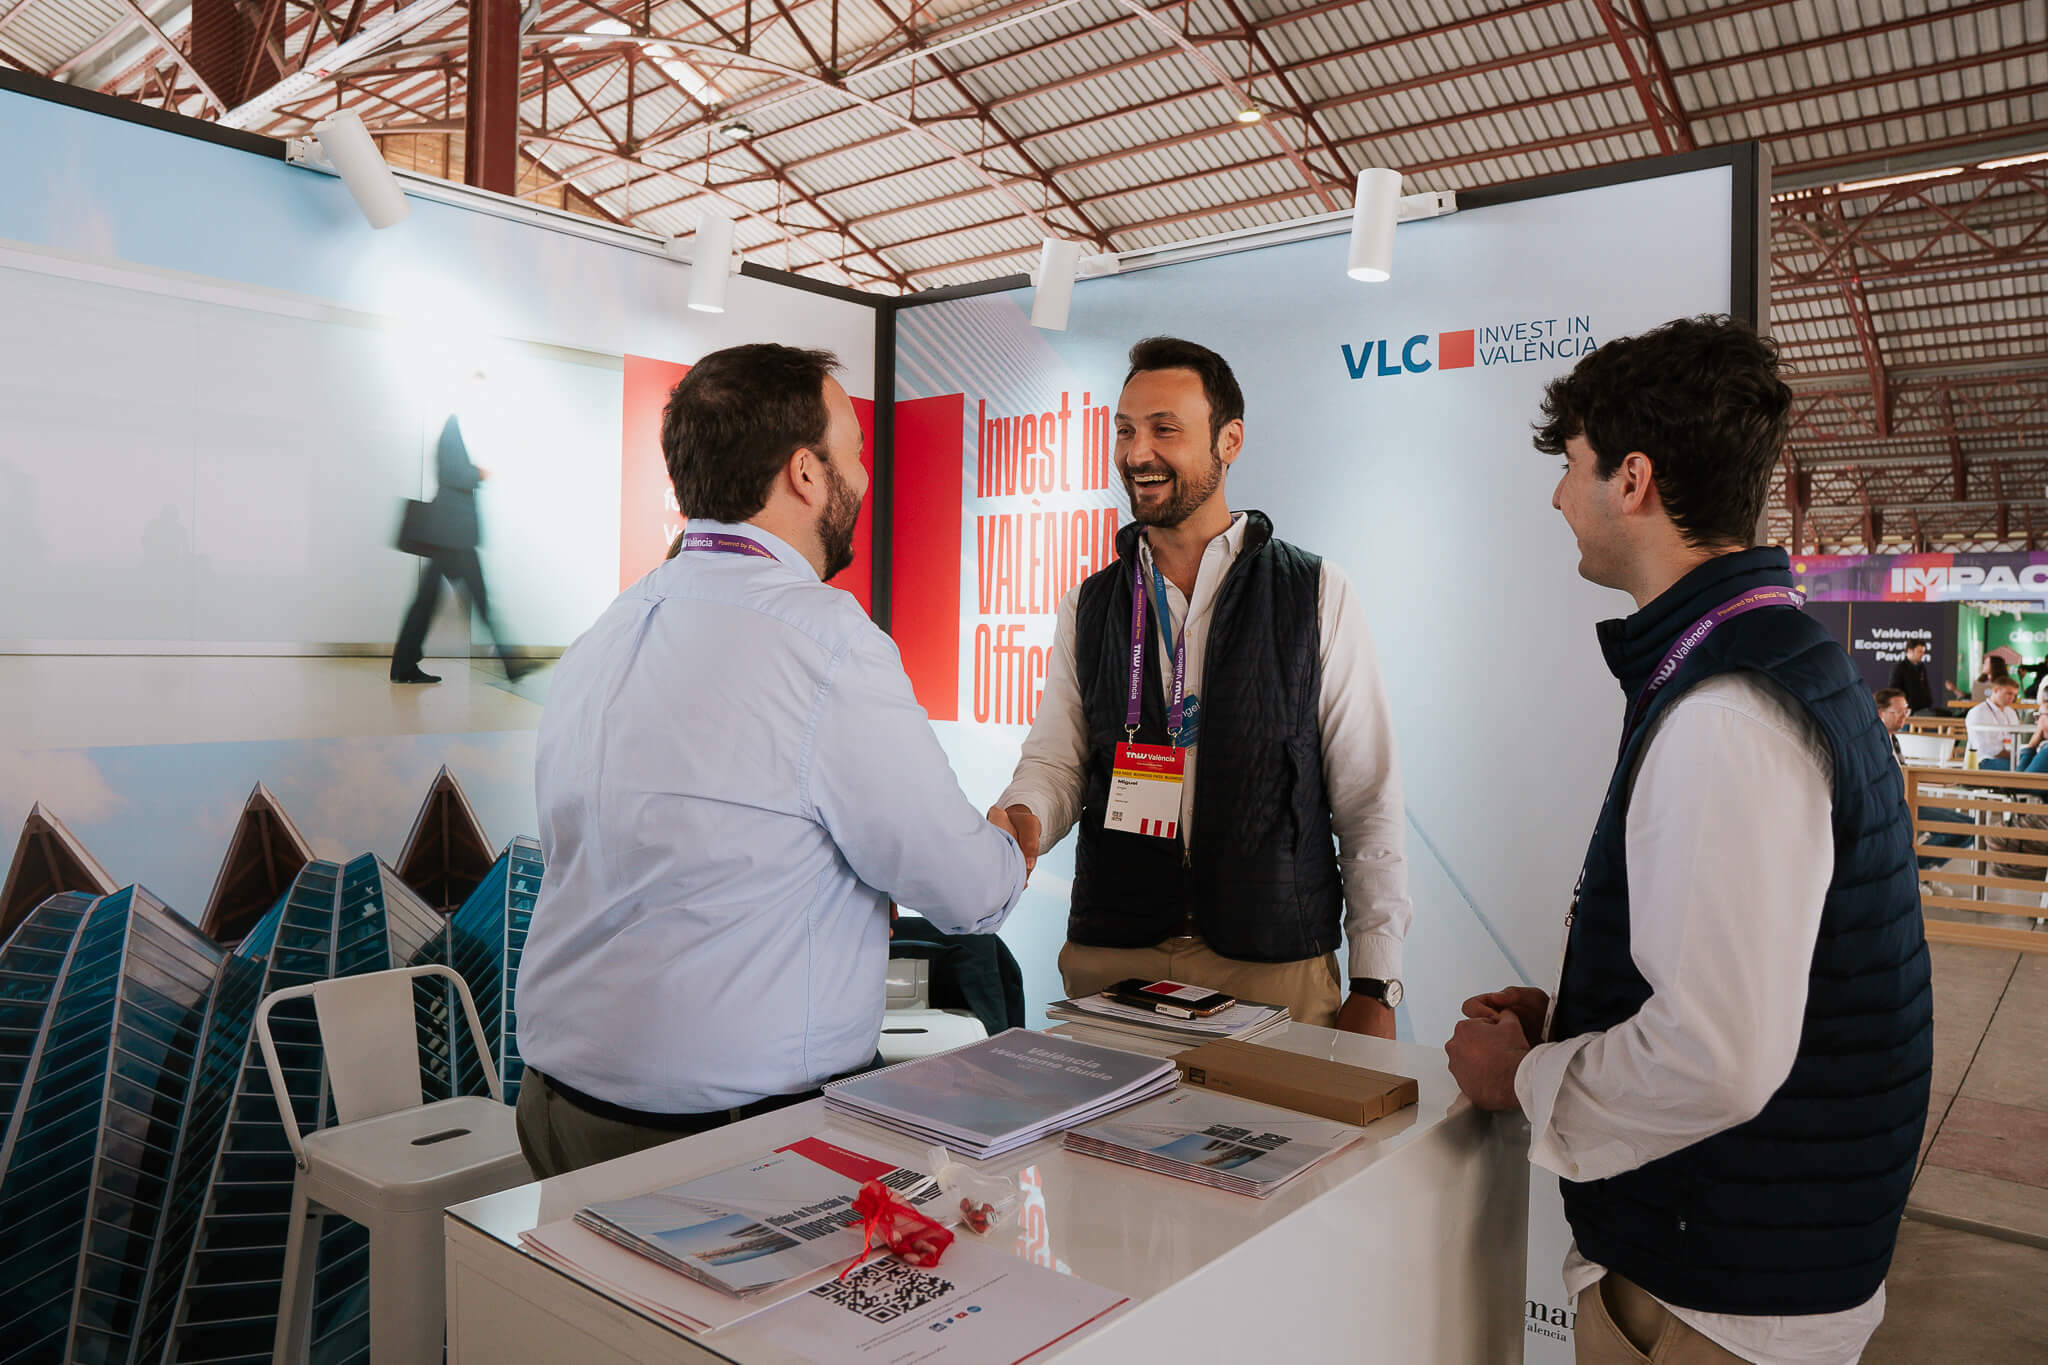 Why partner with TNW València?